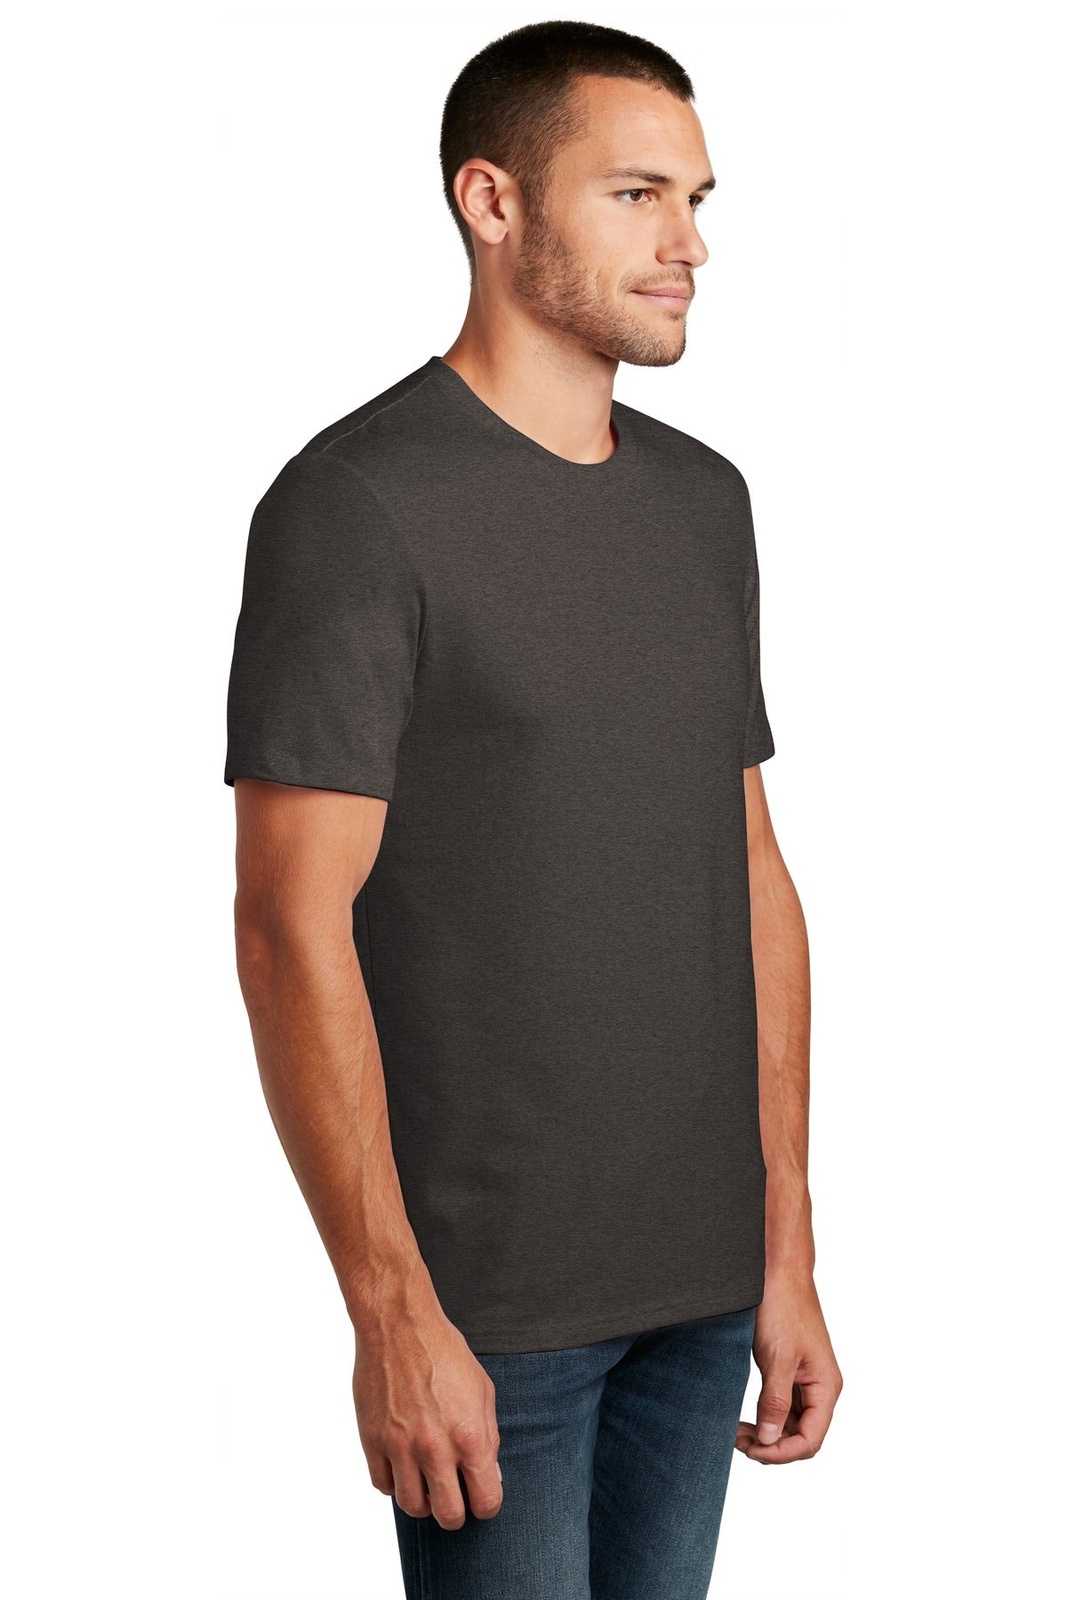 District DT7500 Flex Tee - Heathered Charcoal - HIT a Double - 4